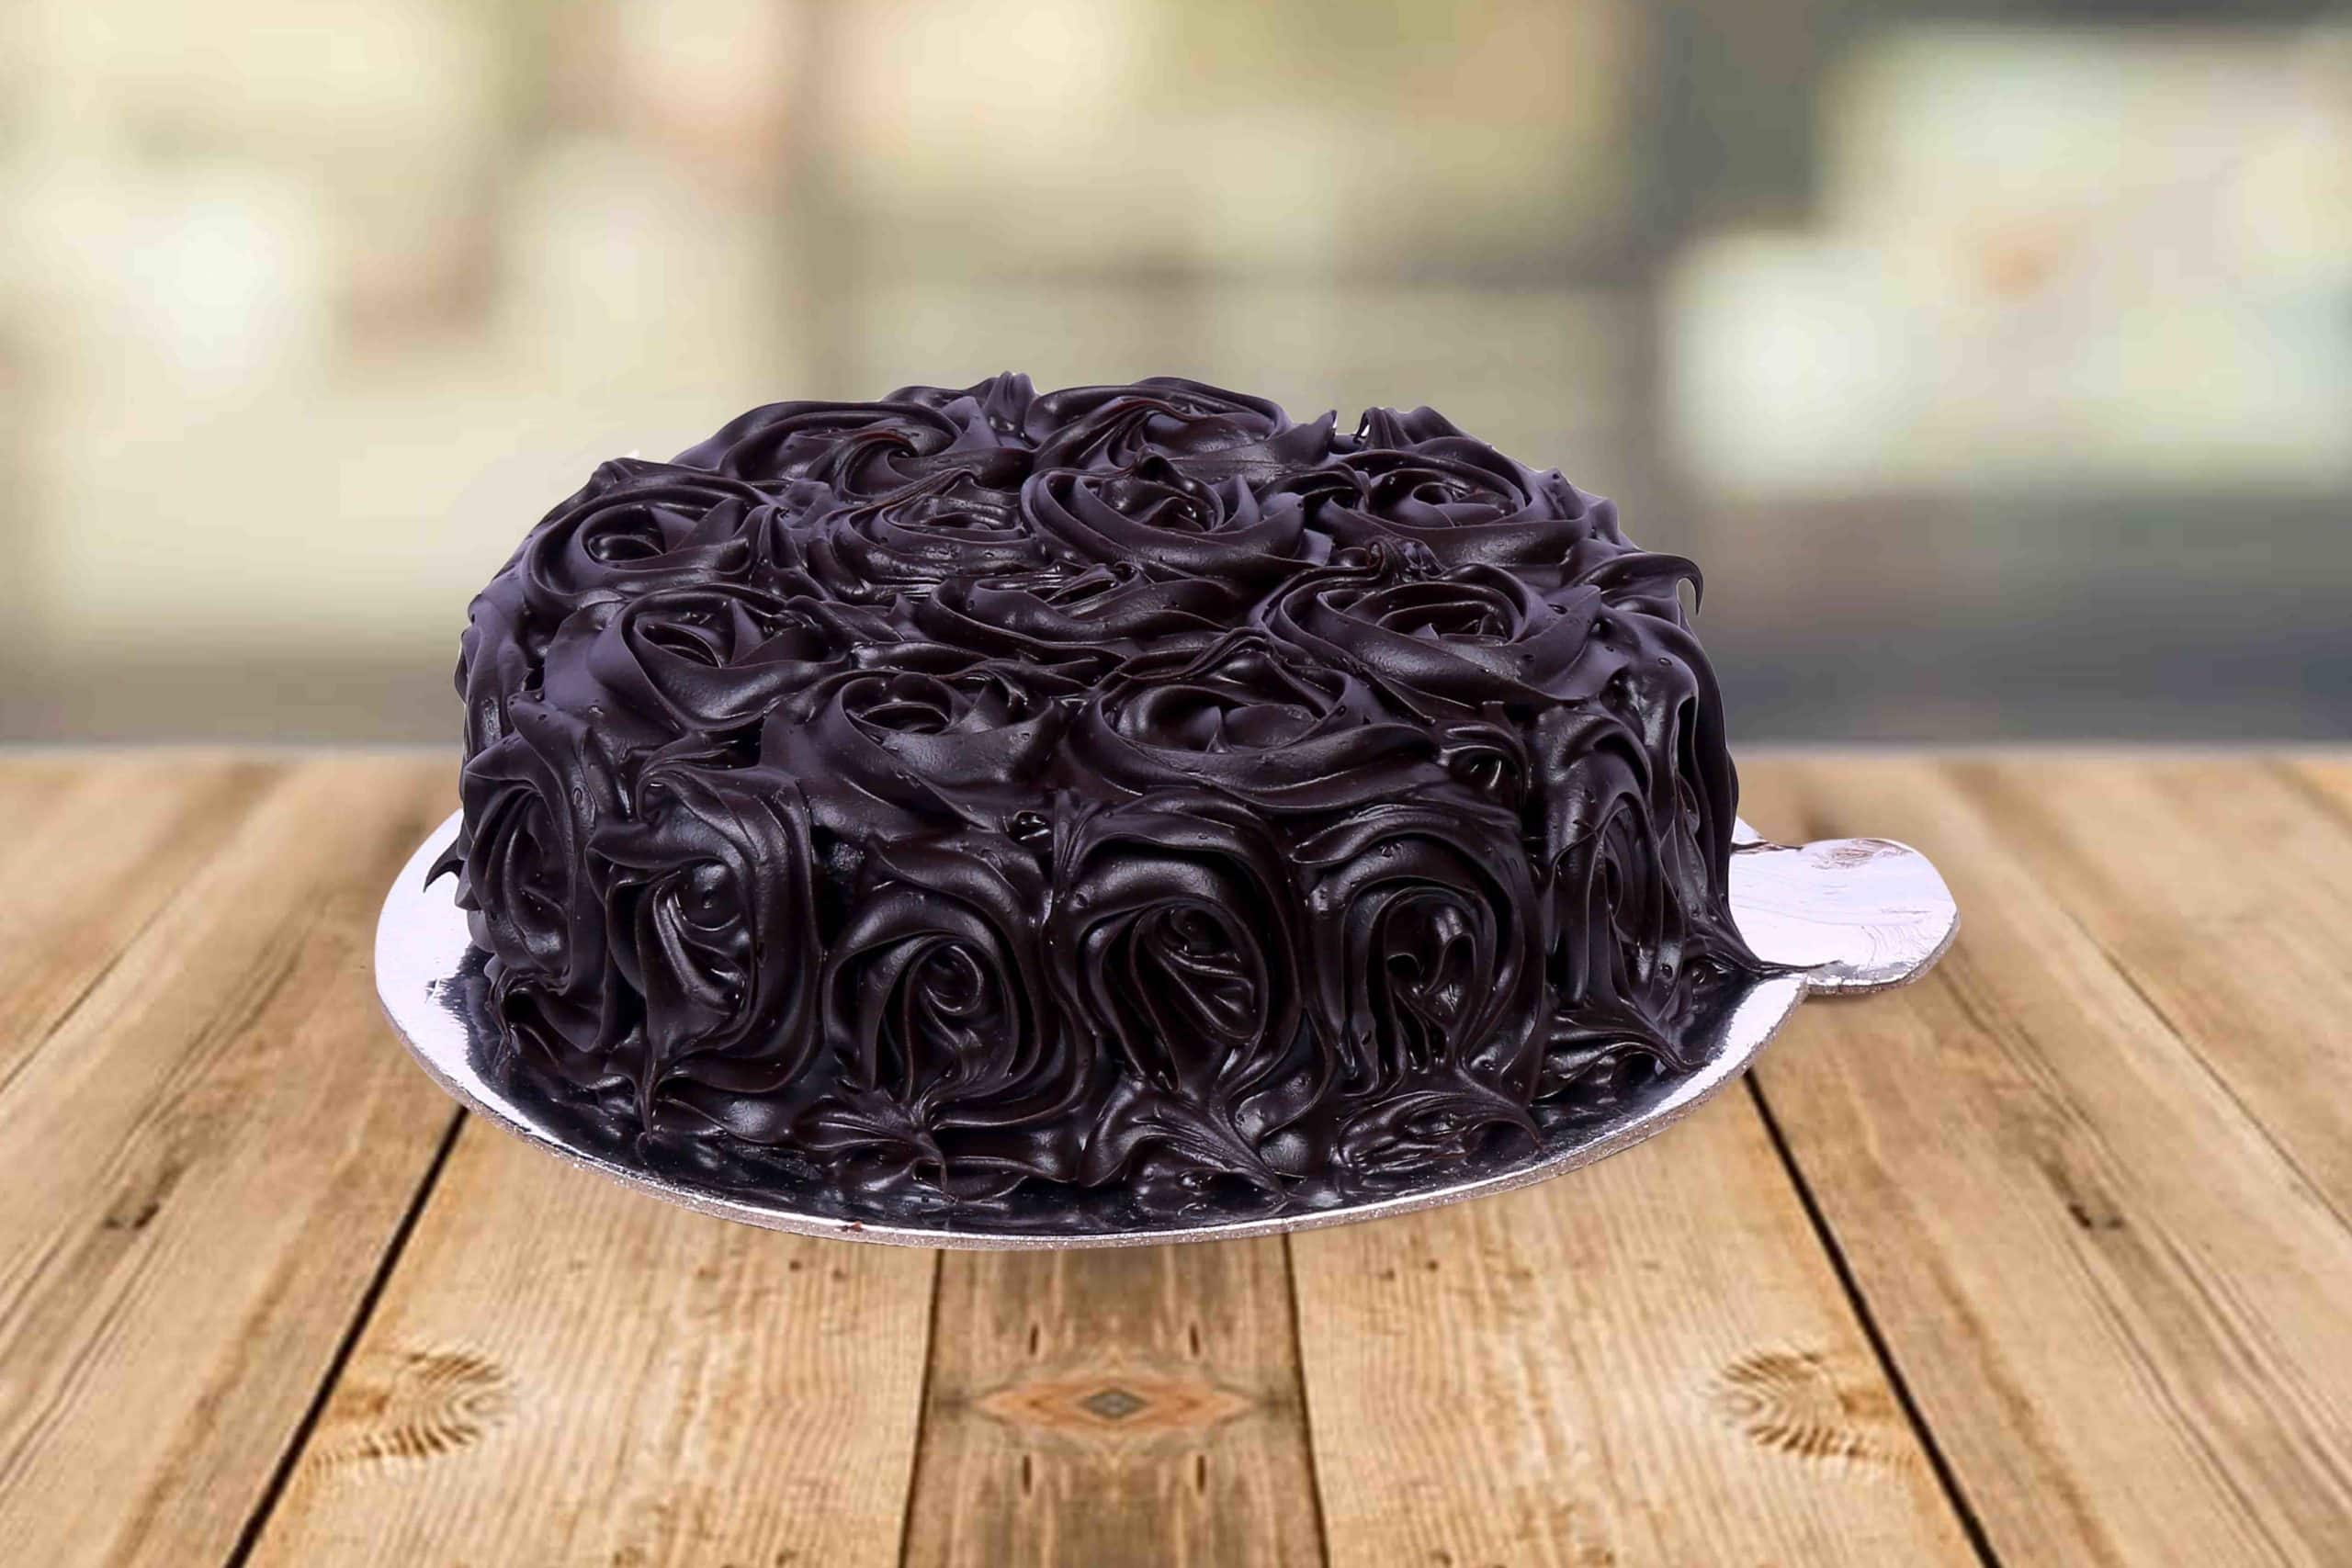 Buy The Chocolate Room Cake - Choco Chip-Egg Online at Best Price of Rs 535  - bigbasket